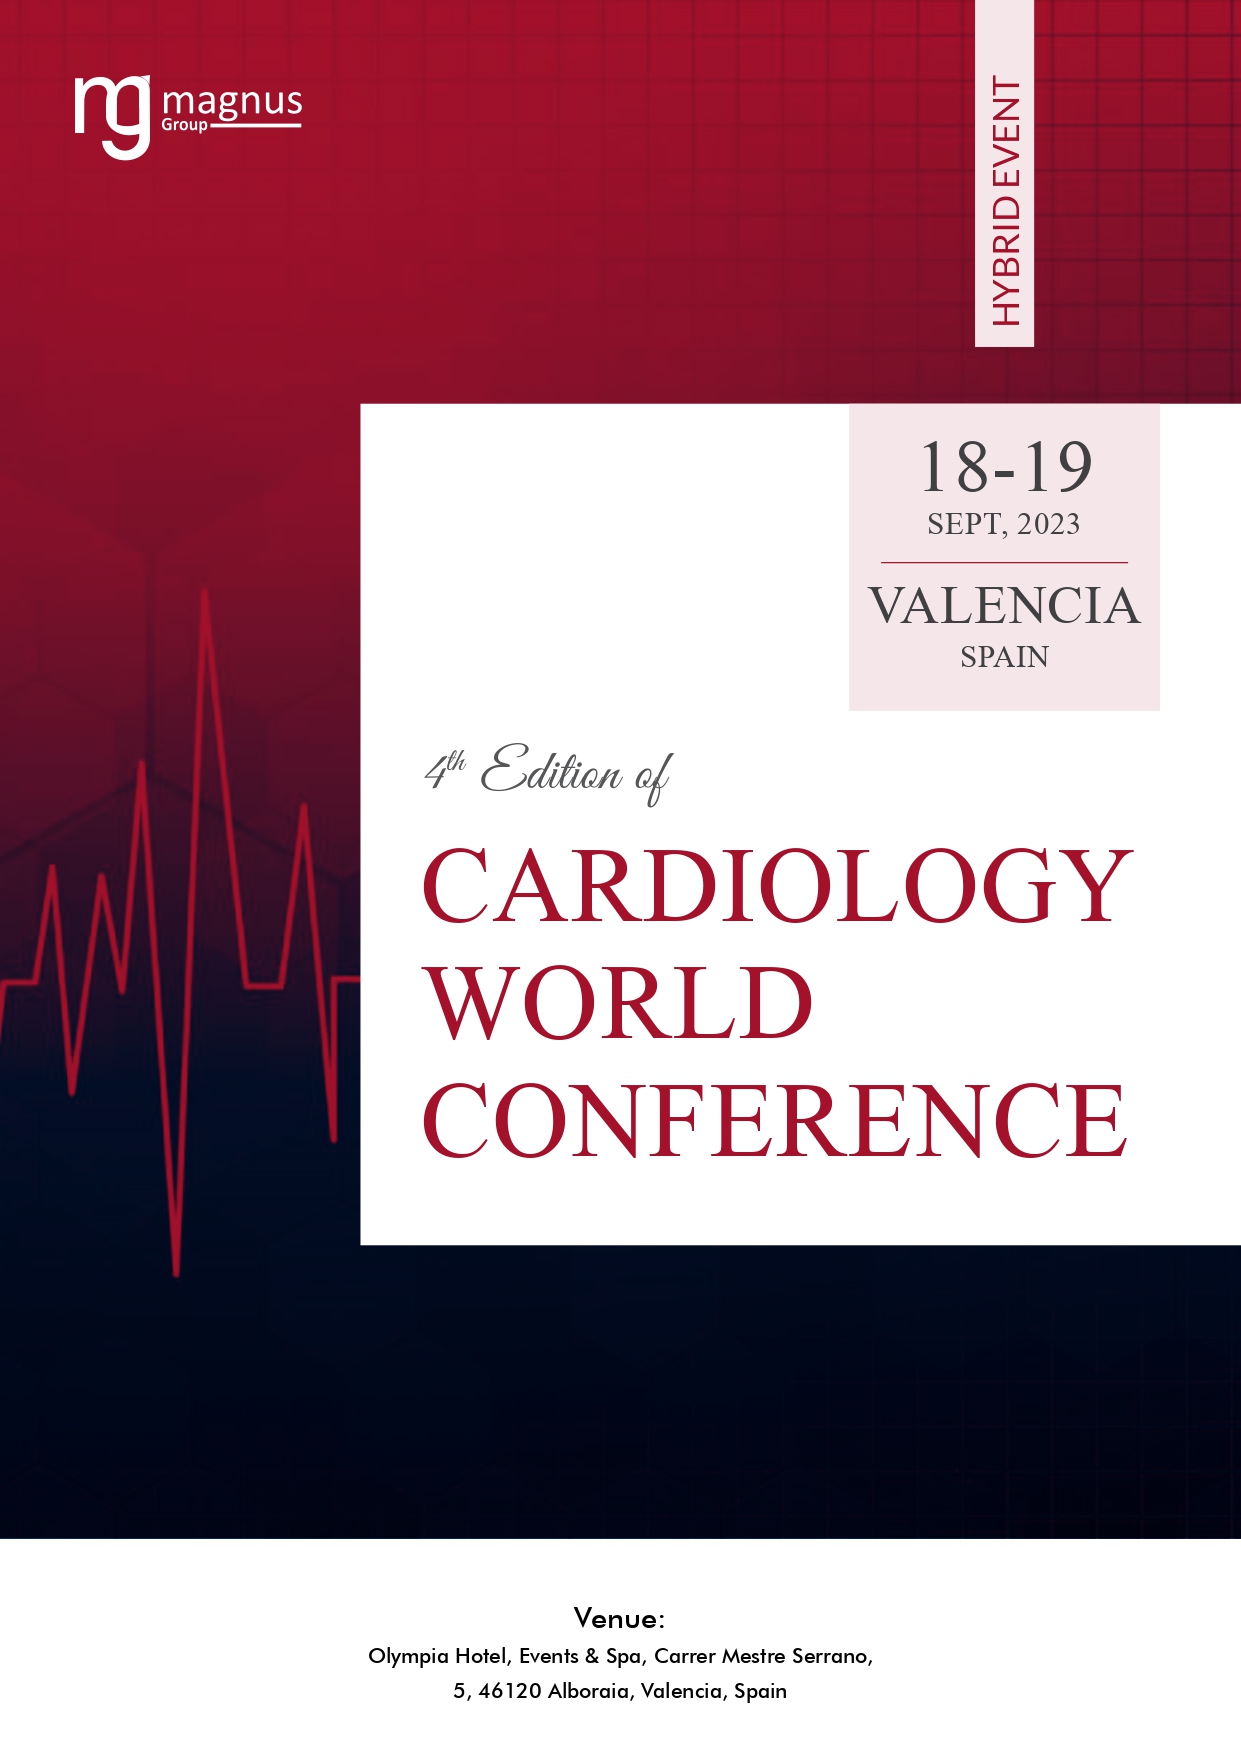 4th Edition of Cardiology World Conference | Valencia, Spain Book